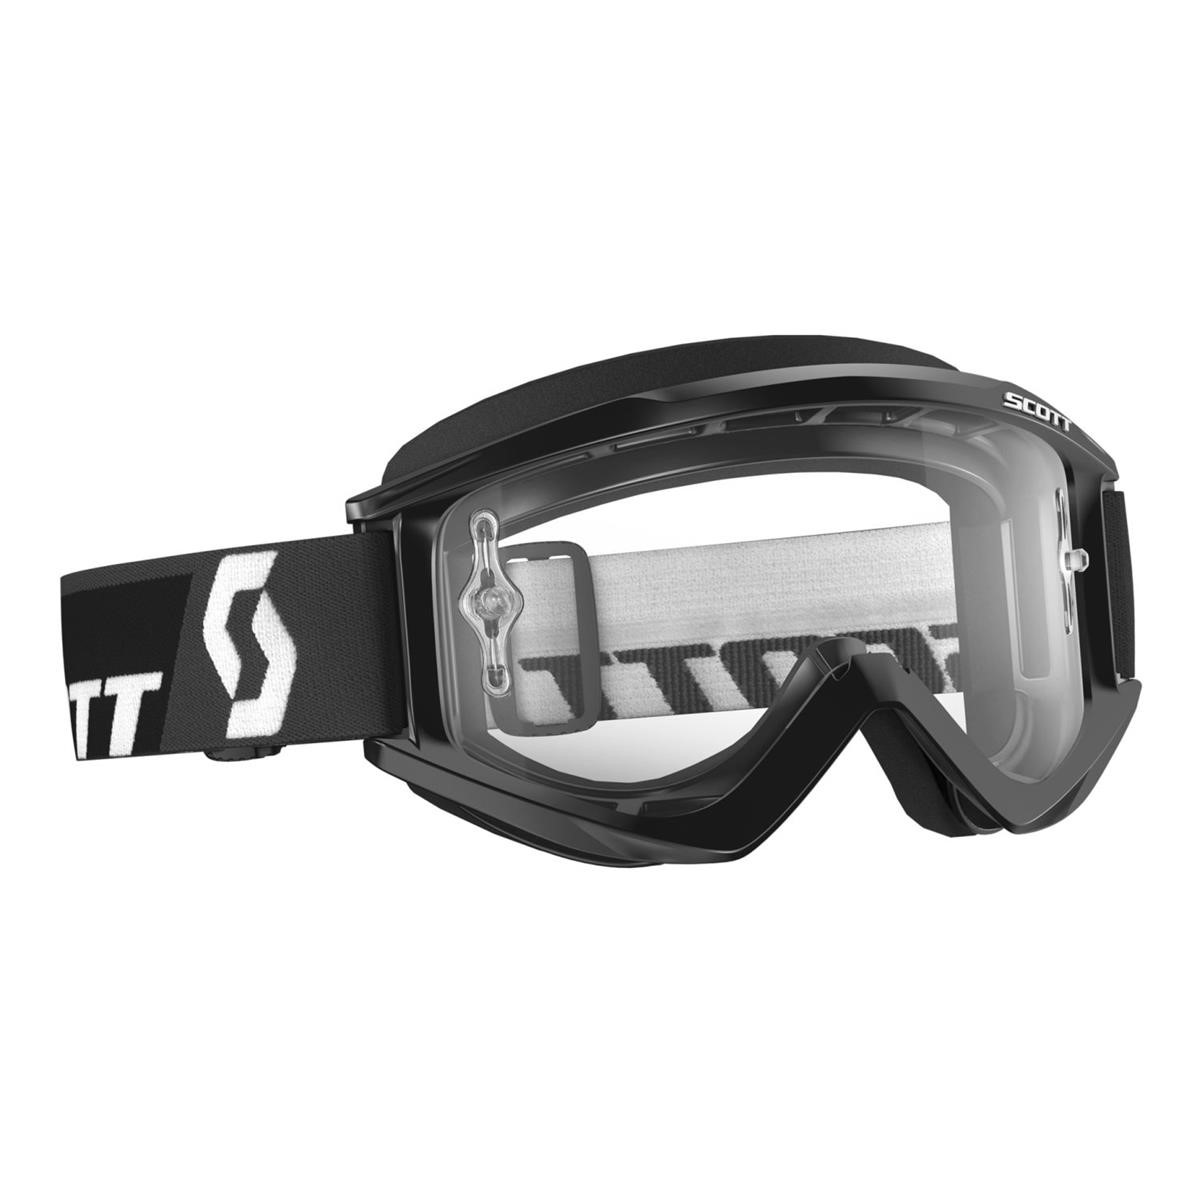 Scott Goggle RecoilXi Black/Clear Works